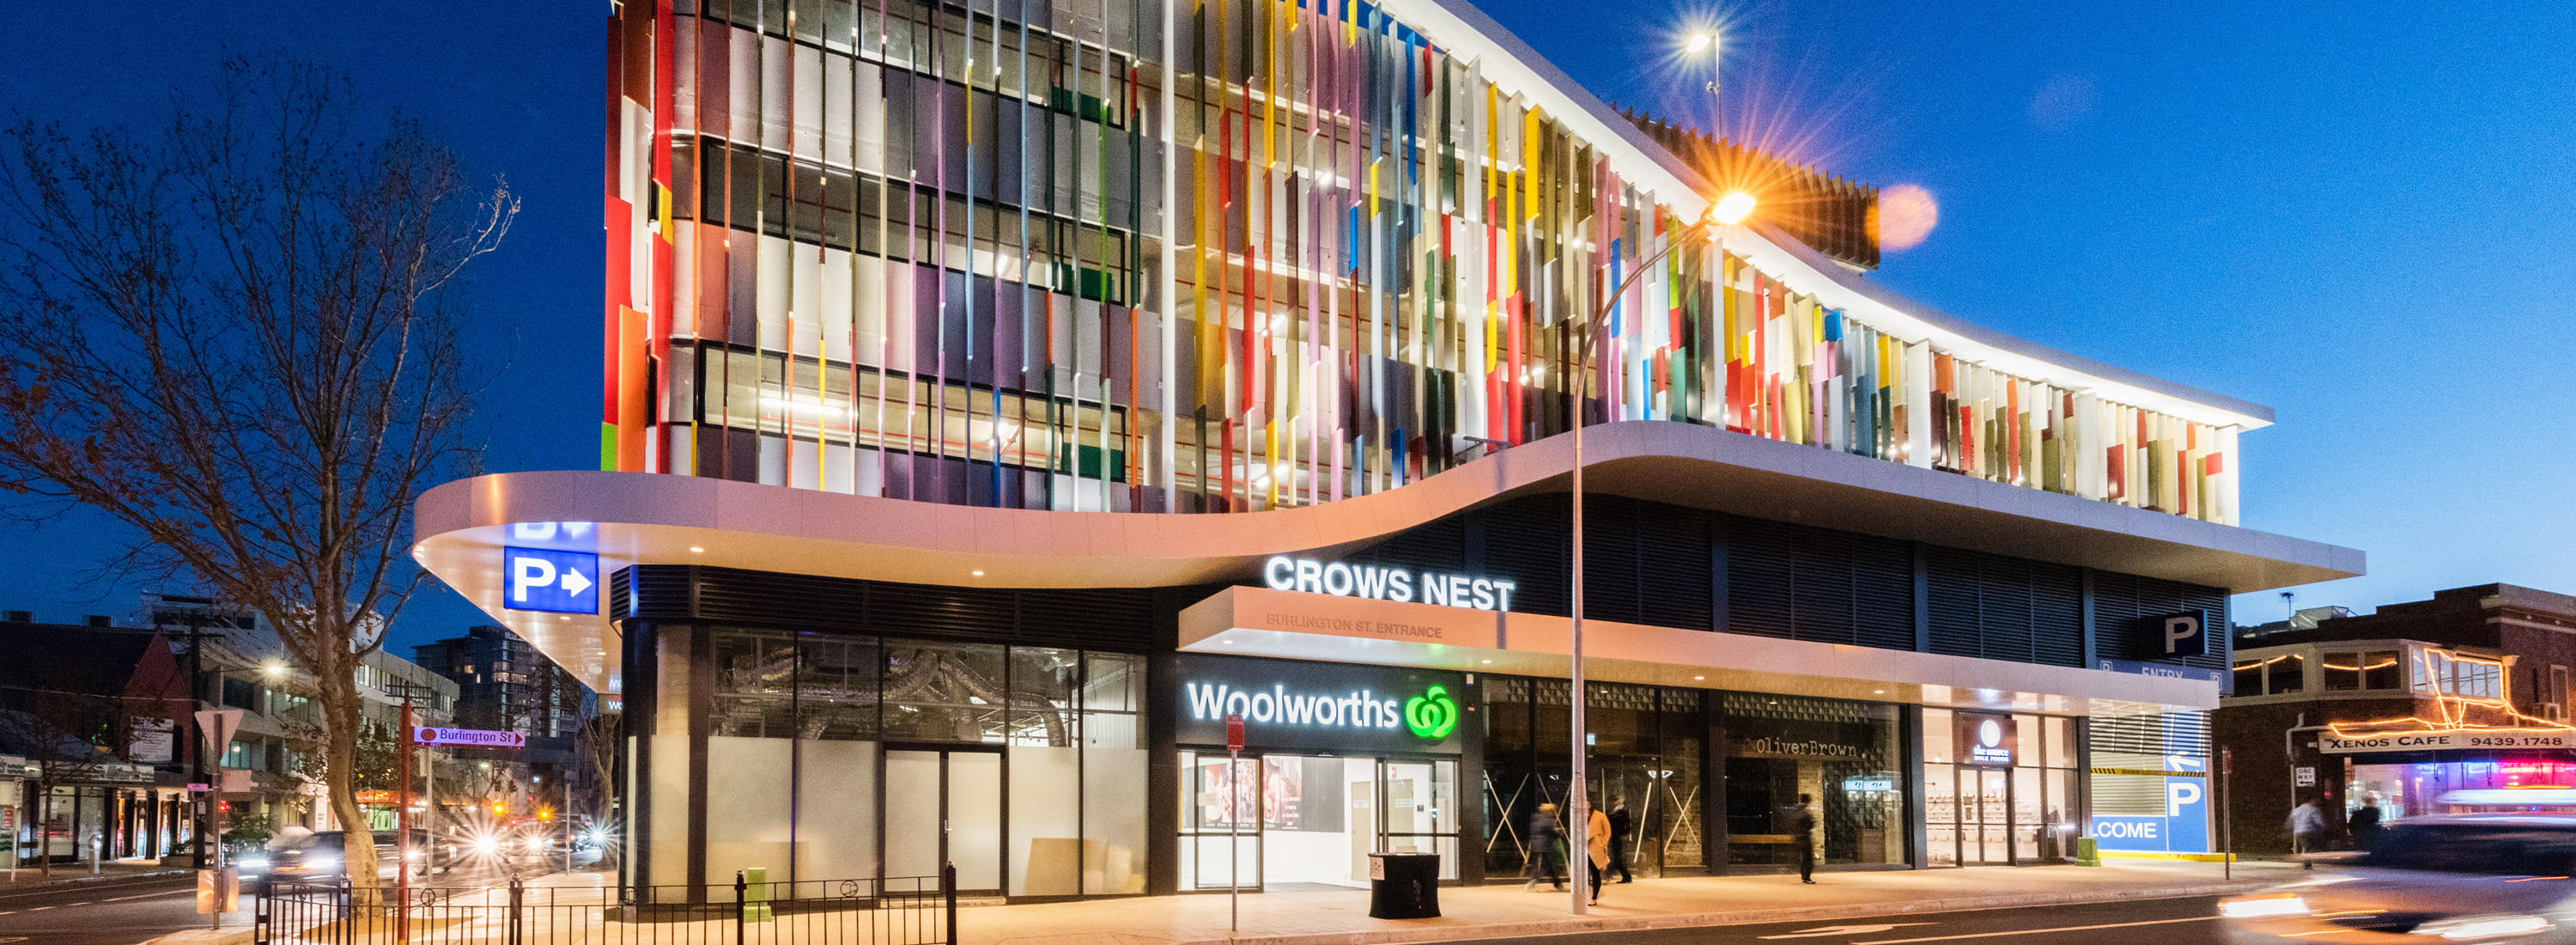 Crows Nest Shopping Centre